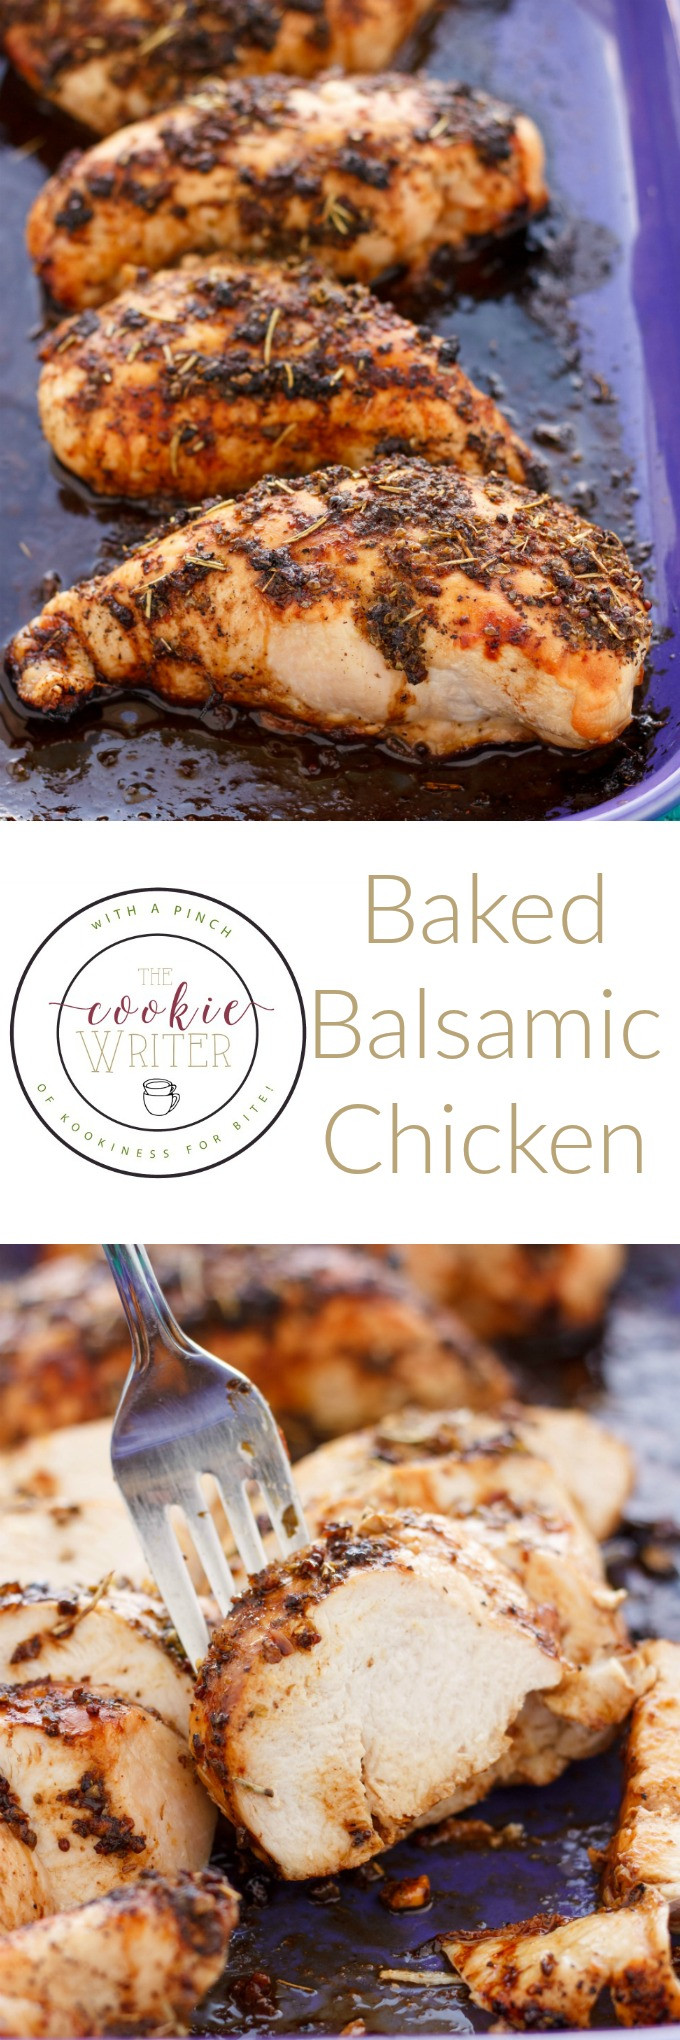 Baked Chicken Healthy
 Baked Balsamic Chicken The Cookie Writer